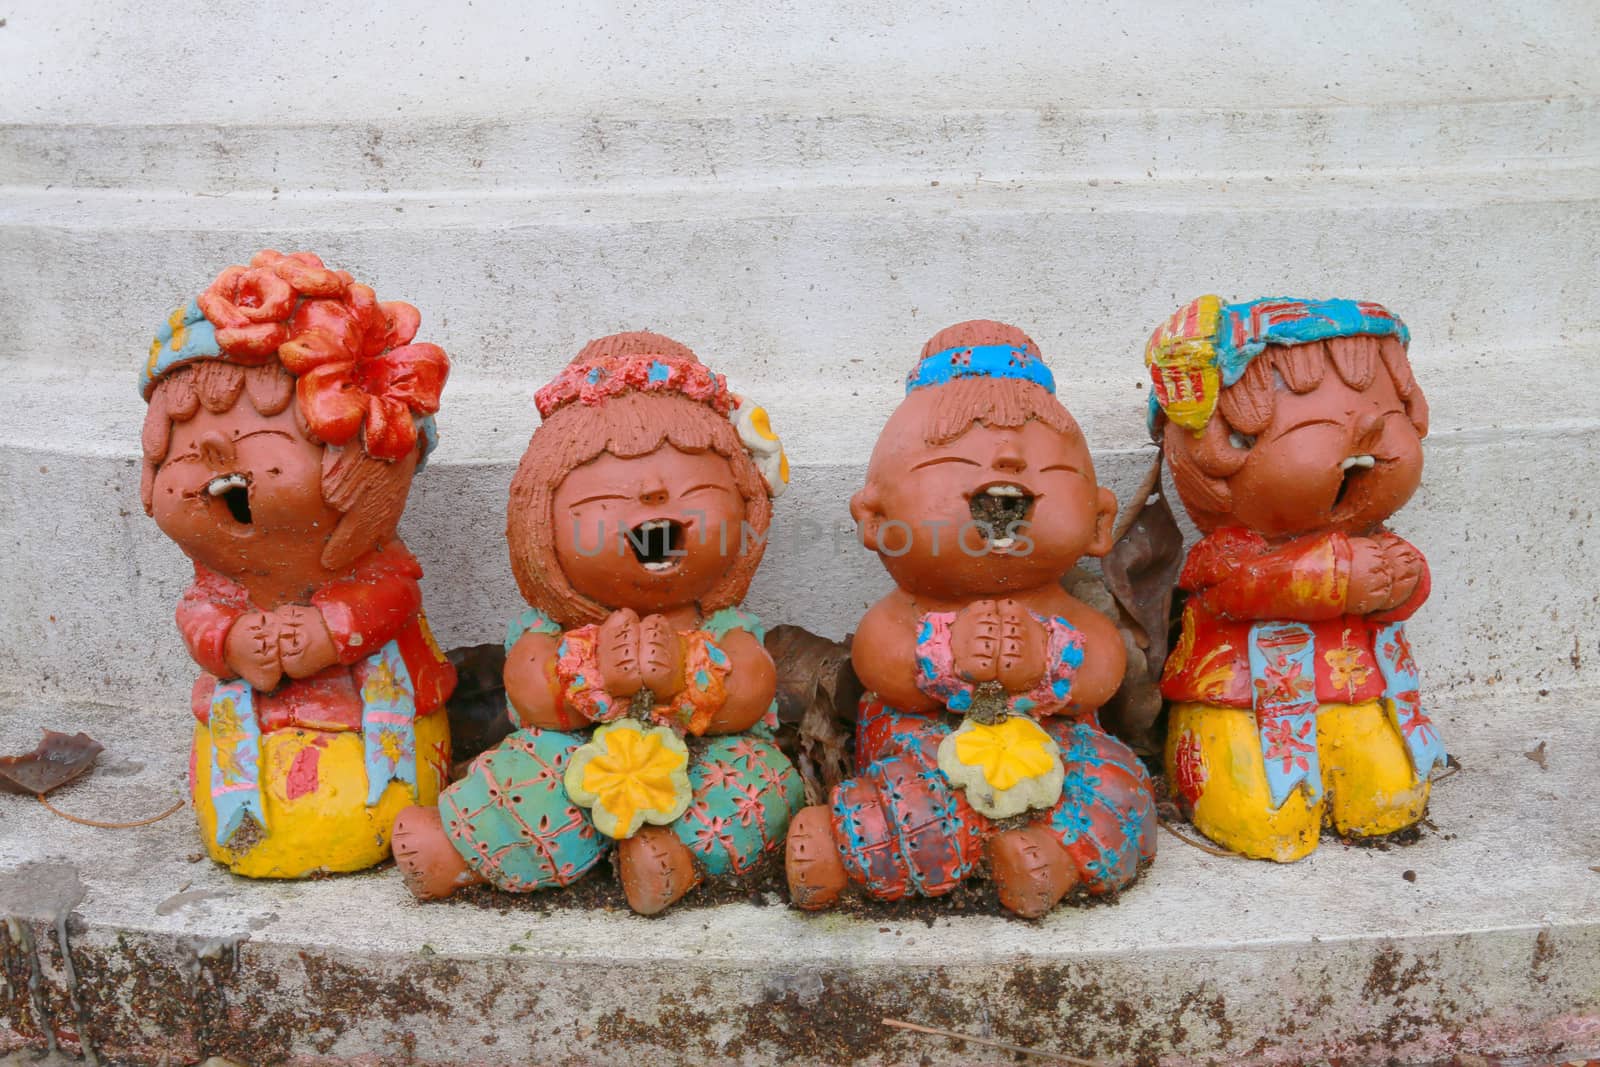 The sculptur of children laugh is the traditional art decoration which can found every where.